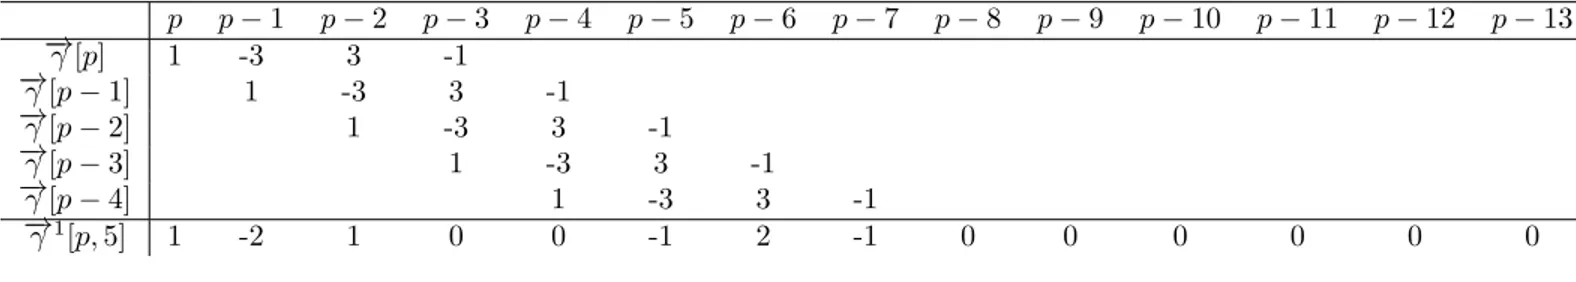 Table 9: Difference vector of γ[p].